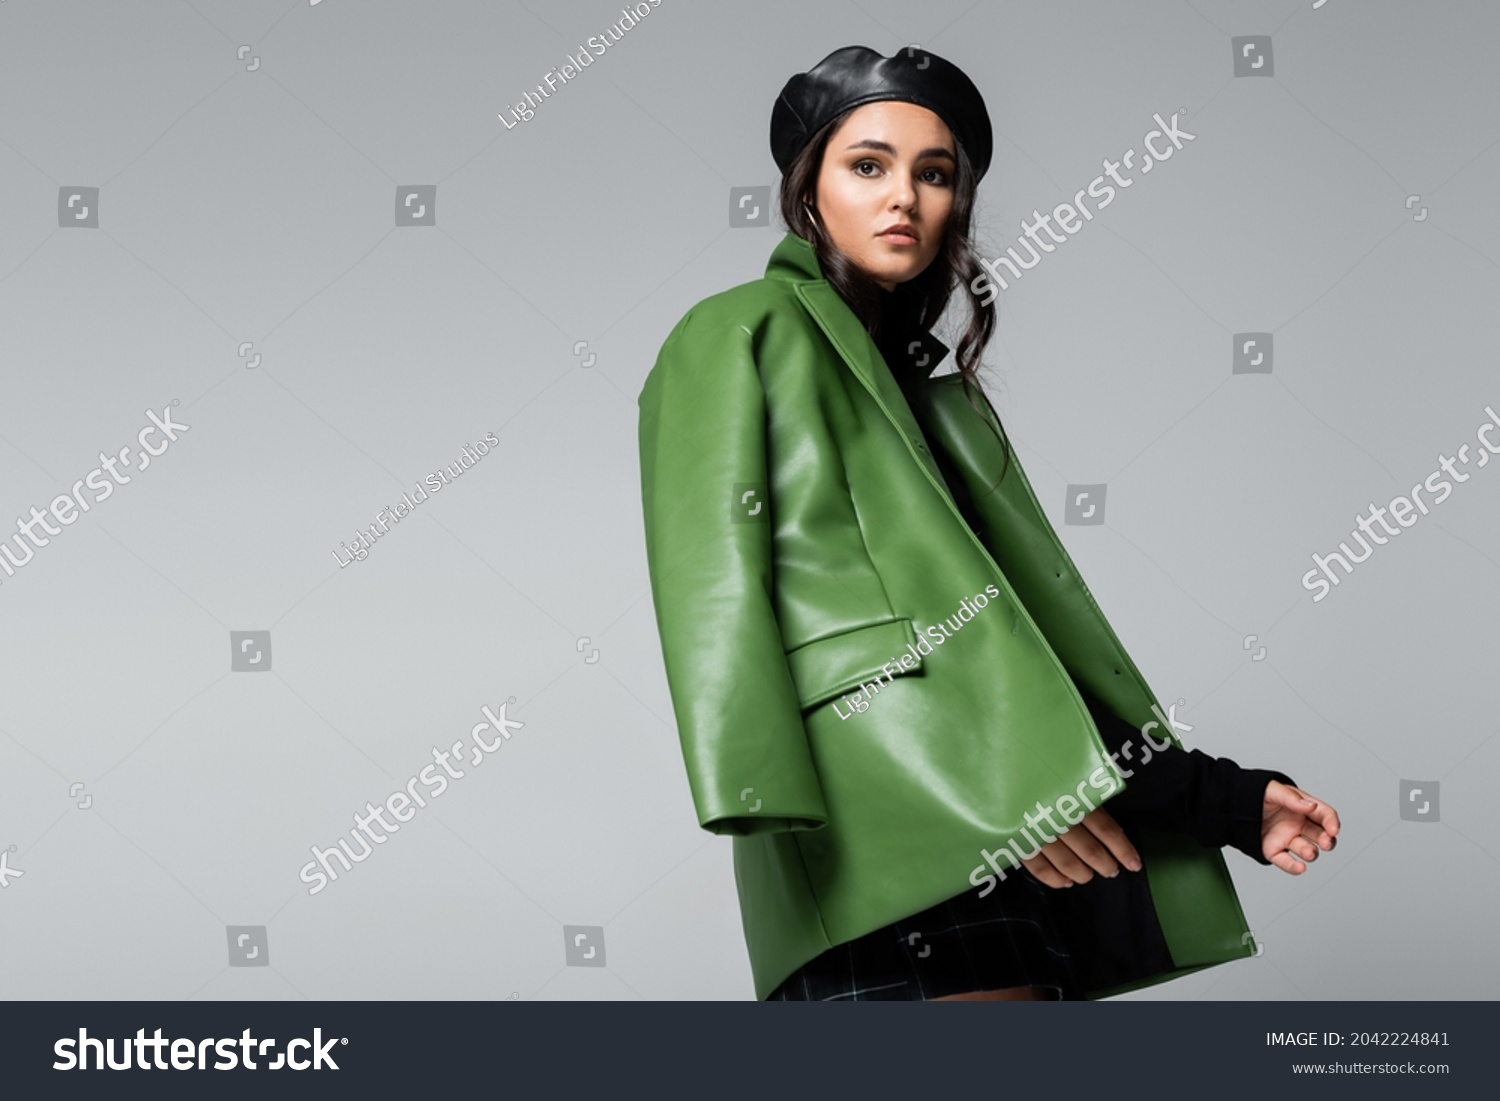 young trendy woman in black beret and green leather jacket posing isolated on grey #2042224841